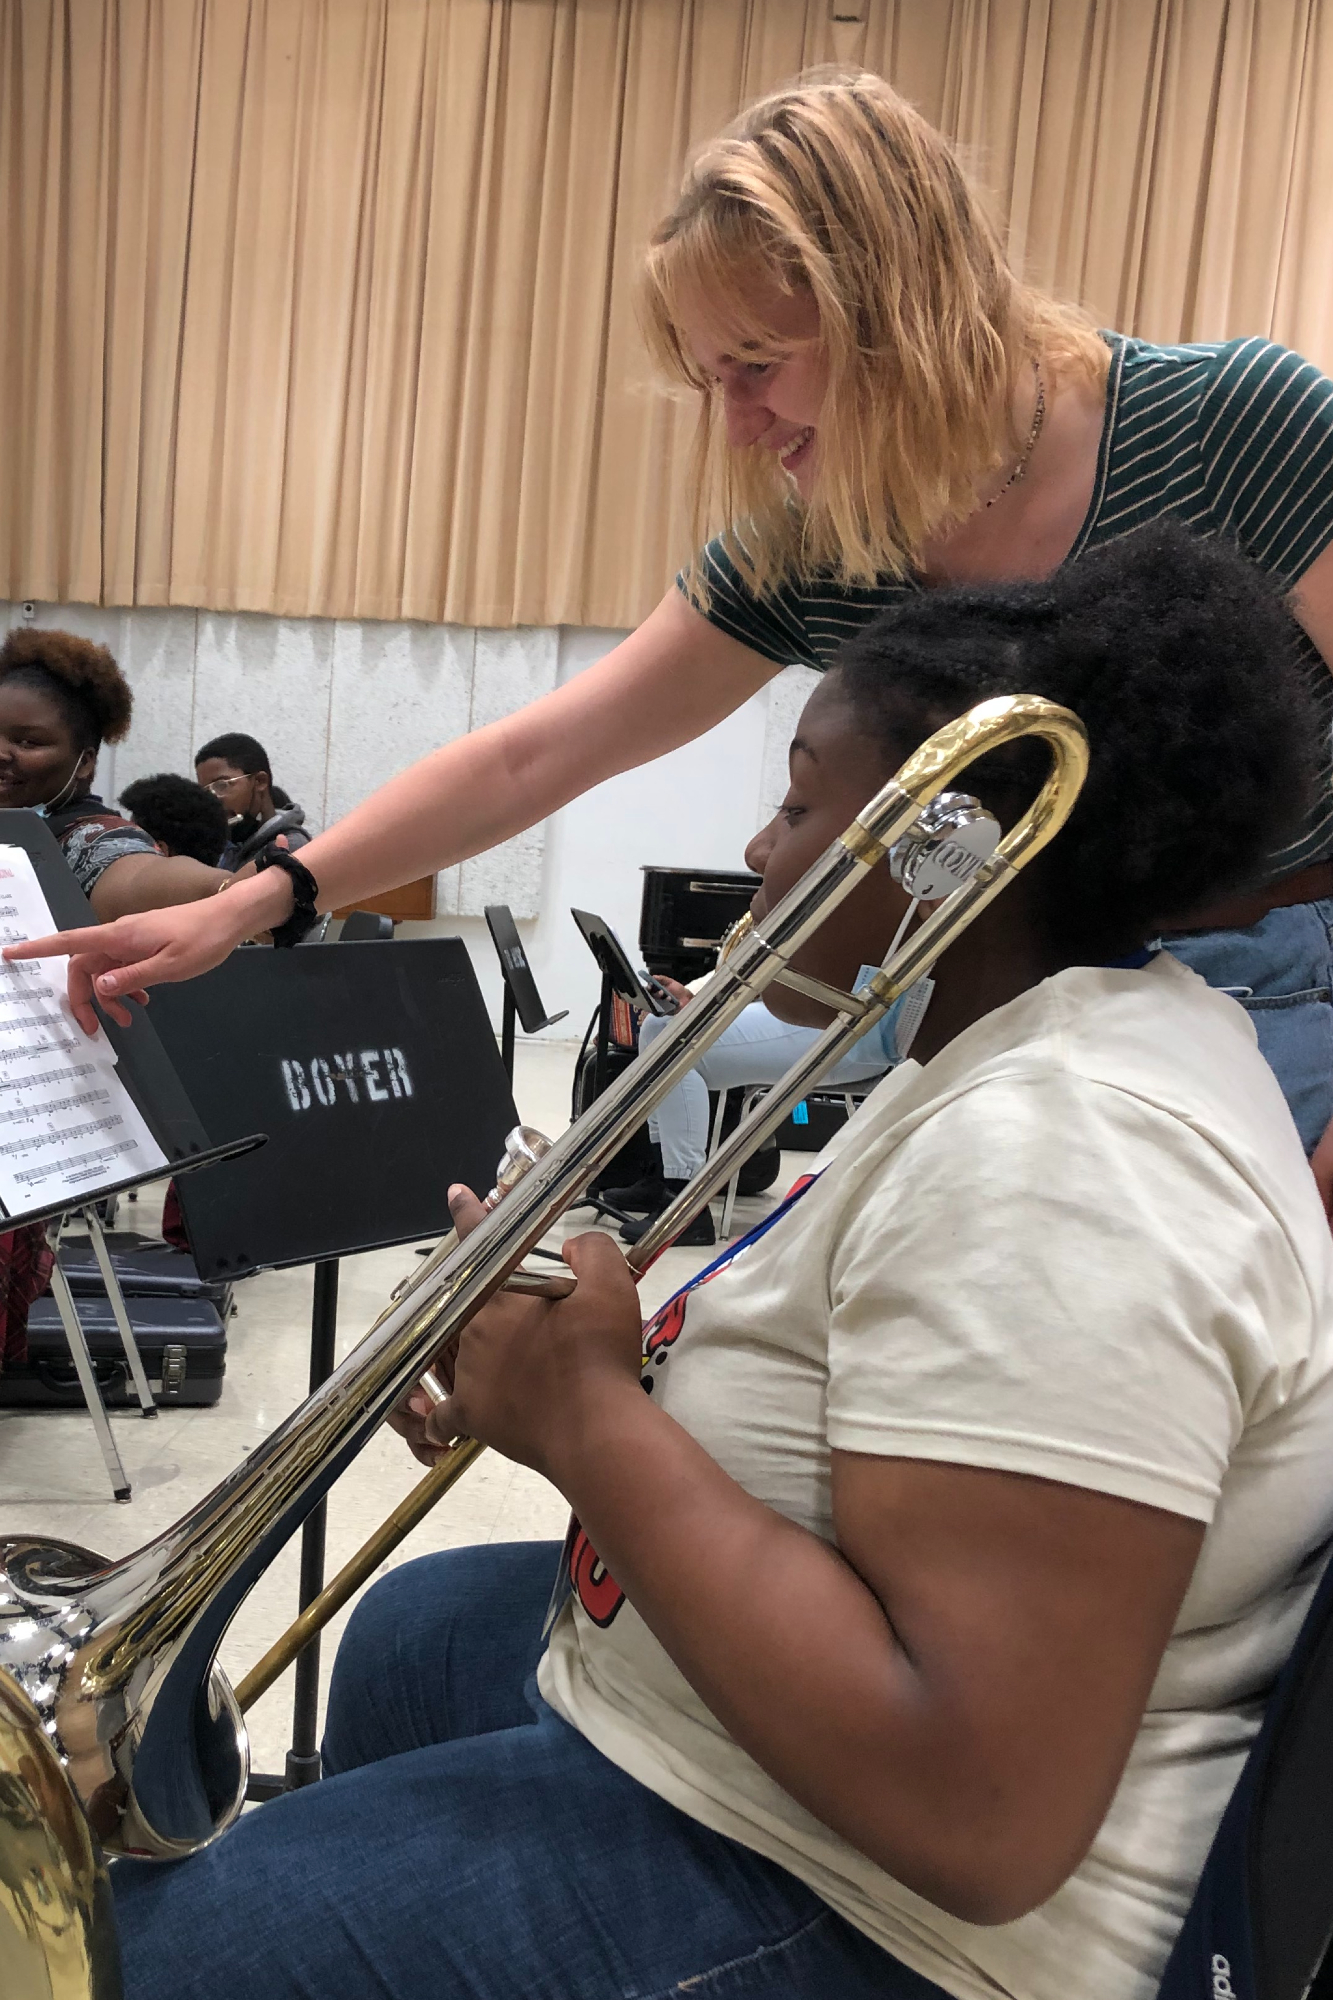 Chaily Deresckey points to music on a stand while helping student playing trombone, 